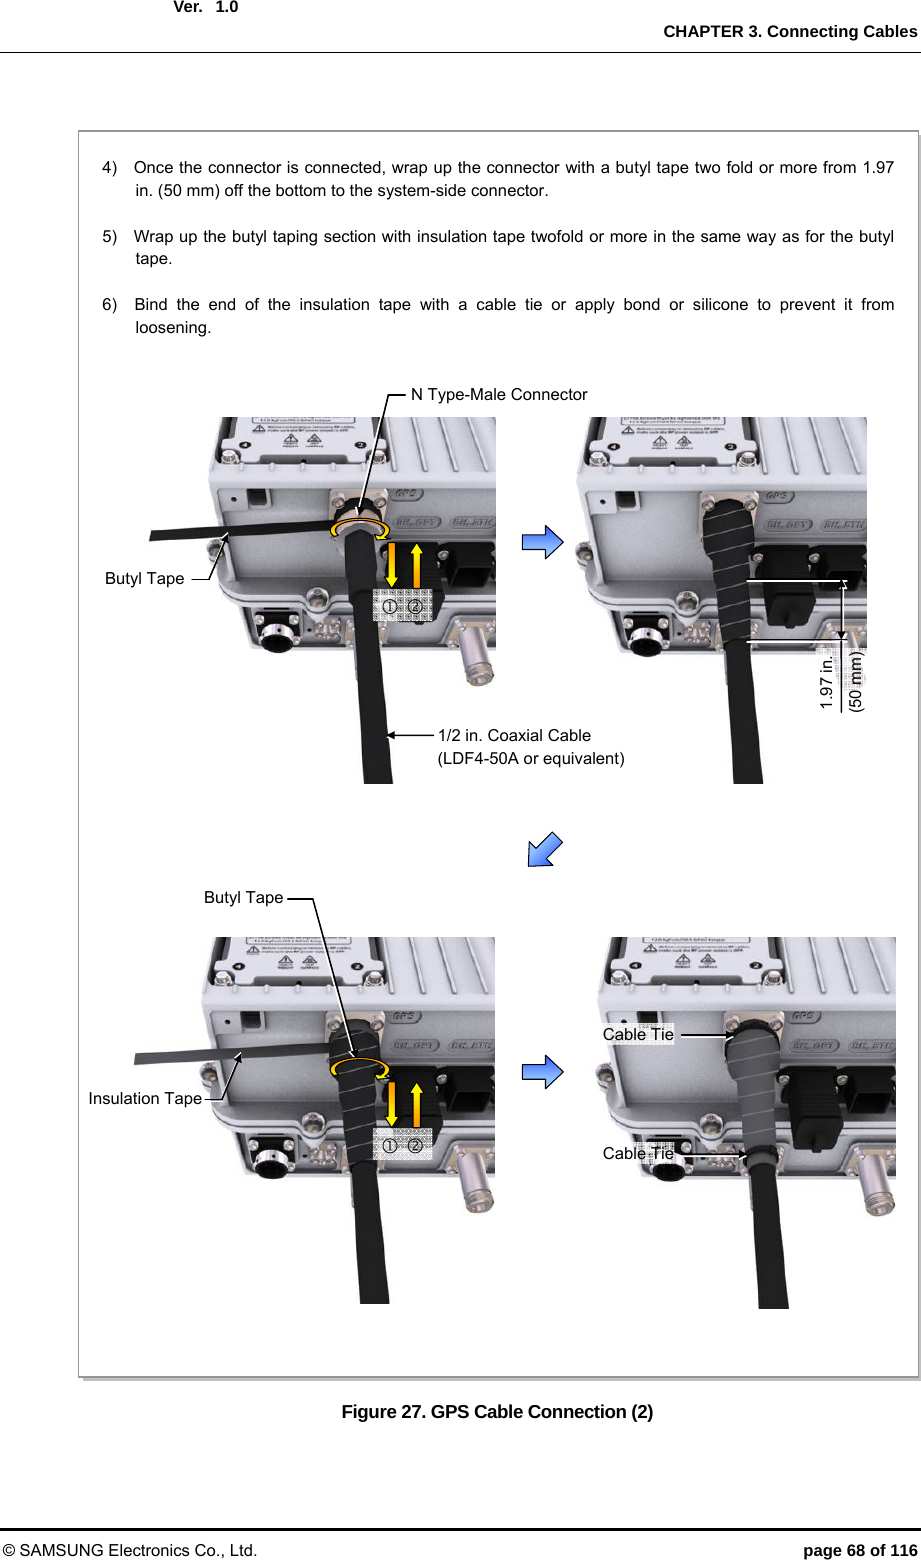  Ver.   CHAPTER 3. Connecting Cables © SAMSUNG Electronics Co., Ltd.  page 68 of 116 1.0 Figure 27. GPS Cable Connection (2) 1.97 in. (50 mm) N Type-Male Connector 1/2 in. Coaxial Cable (LDF4-50A or equivalent) Butyl TapeCable Tie4)    Once the connector is connected, wrap up the connector with a butyl tape two fold or more from 1.97 in. (50 mm) off the bottom to the system-side connector.    5)    Wrap up the butyl taping section with insulation tape twofold or more in the same way as for the butyl tape.  6)  Bind the end of the insulation tape with a cable tie or apply bond or silicone to prevent it from loosening.    Butyl Tape    Cable TieInsulation Tape